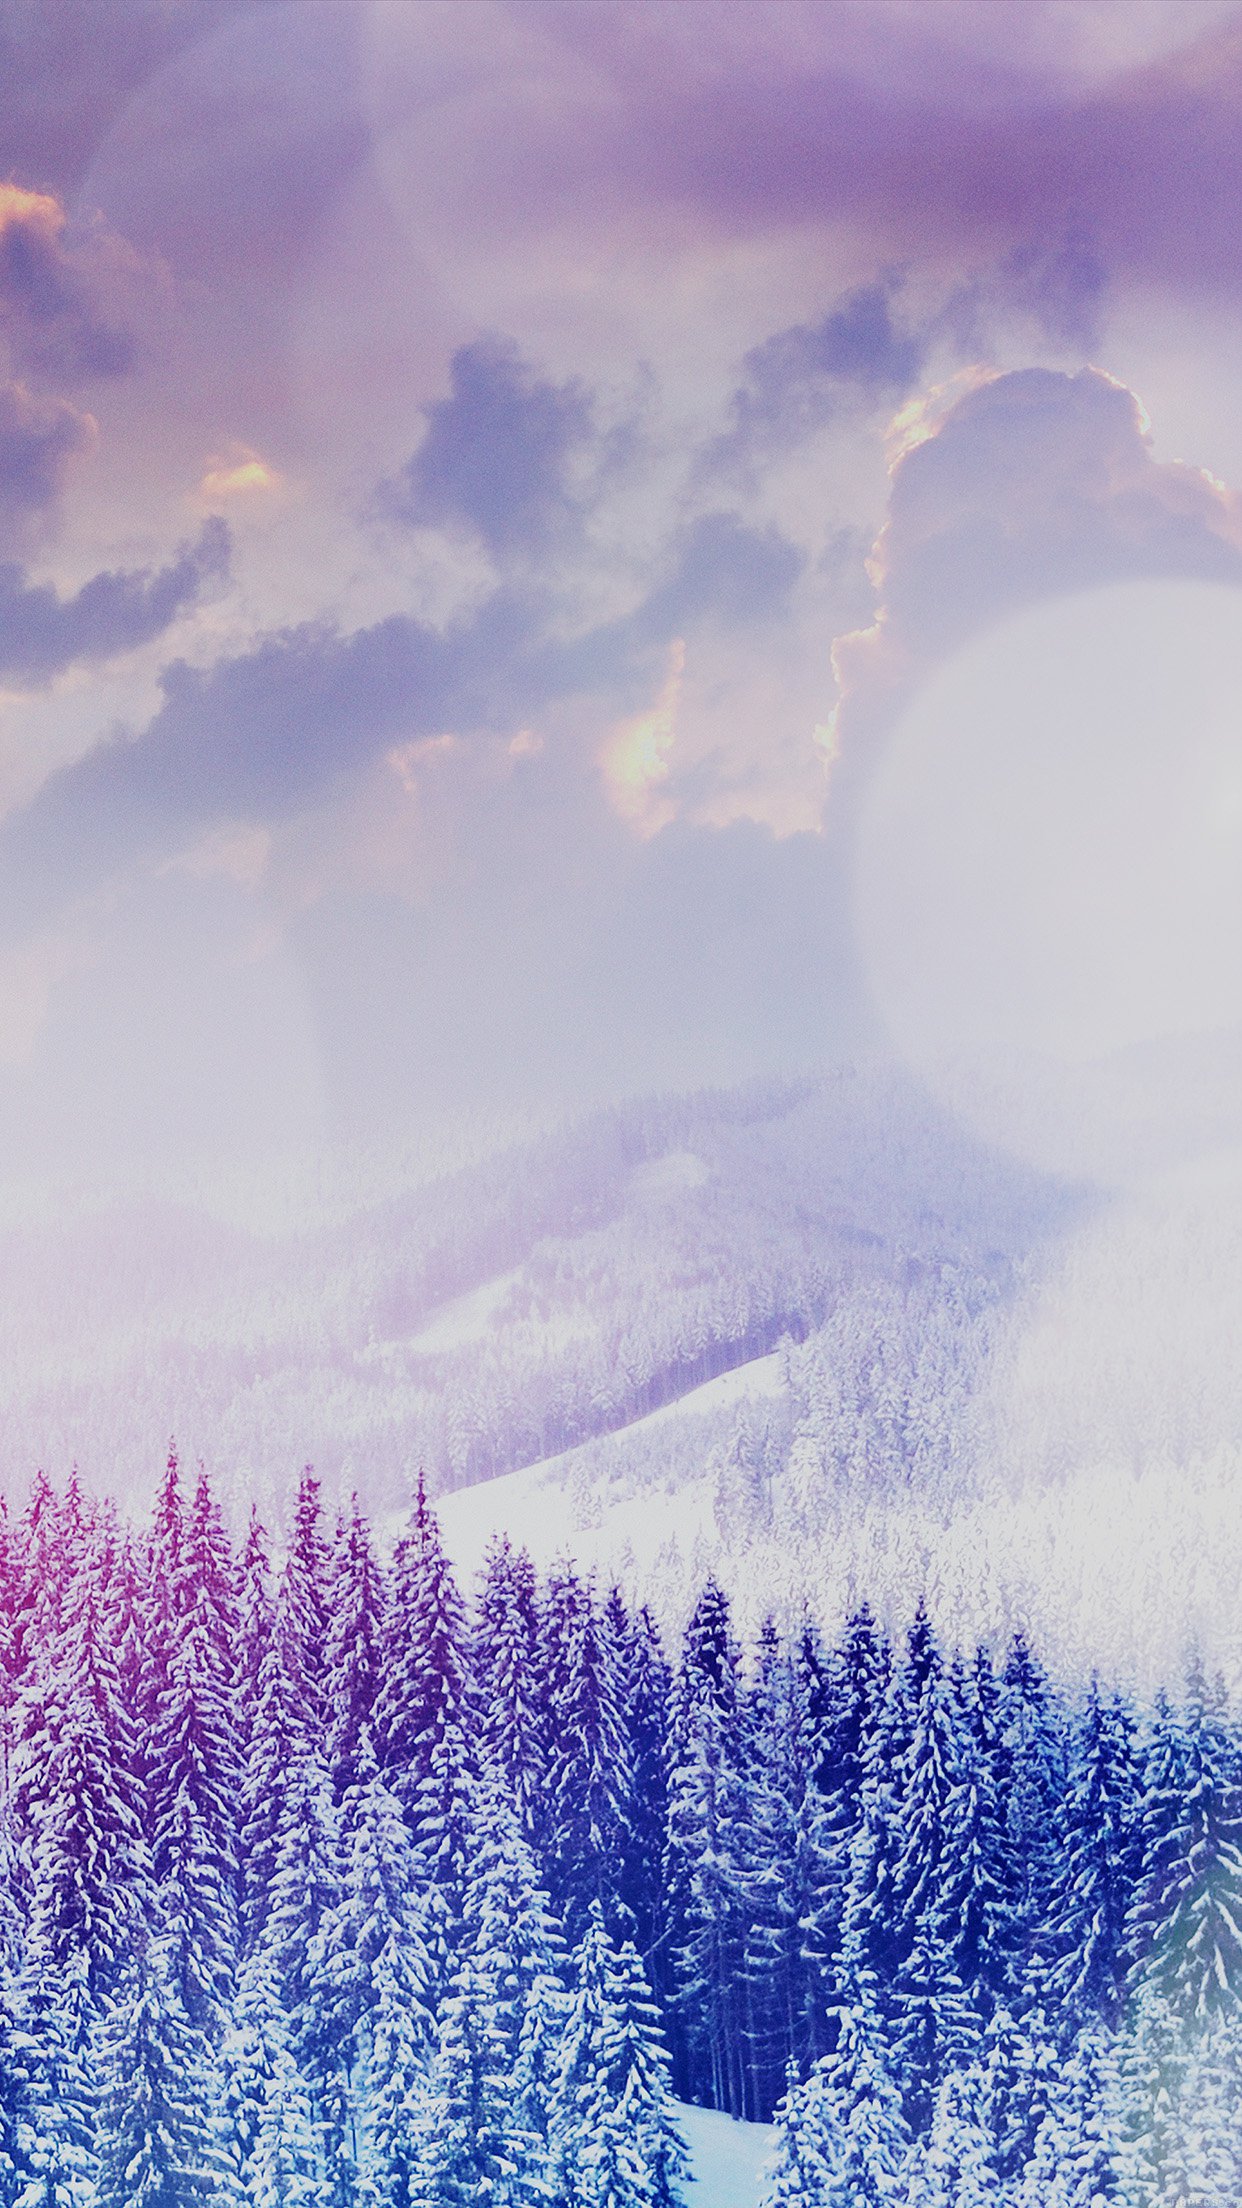 Winter Mountain Snow White Blue Flare Nature Android - HD Wallpaper 